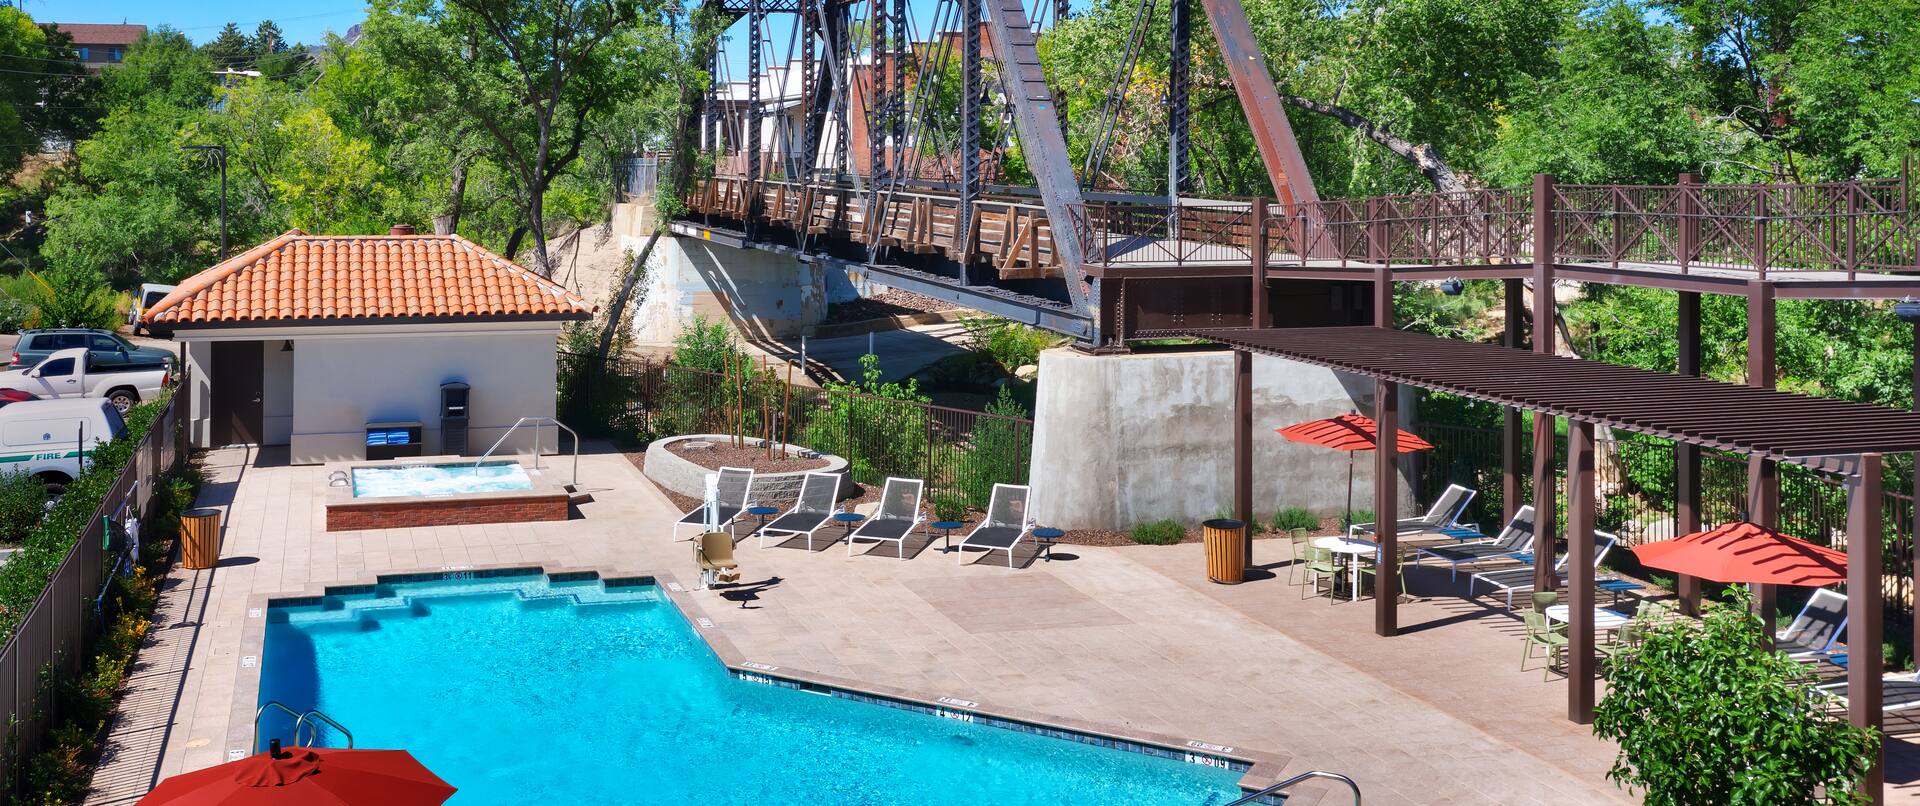 Outdoor Swimming Pool With View of Bridge